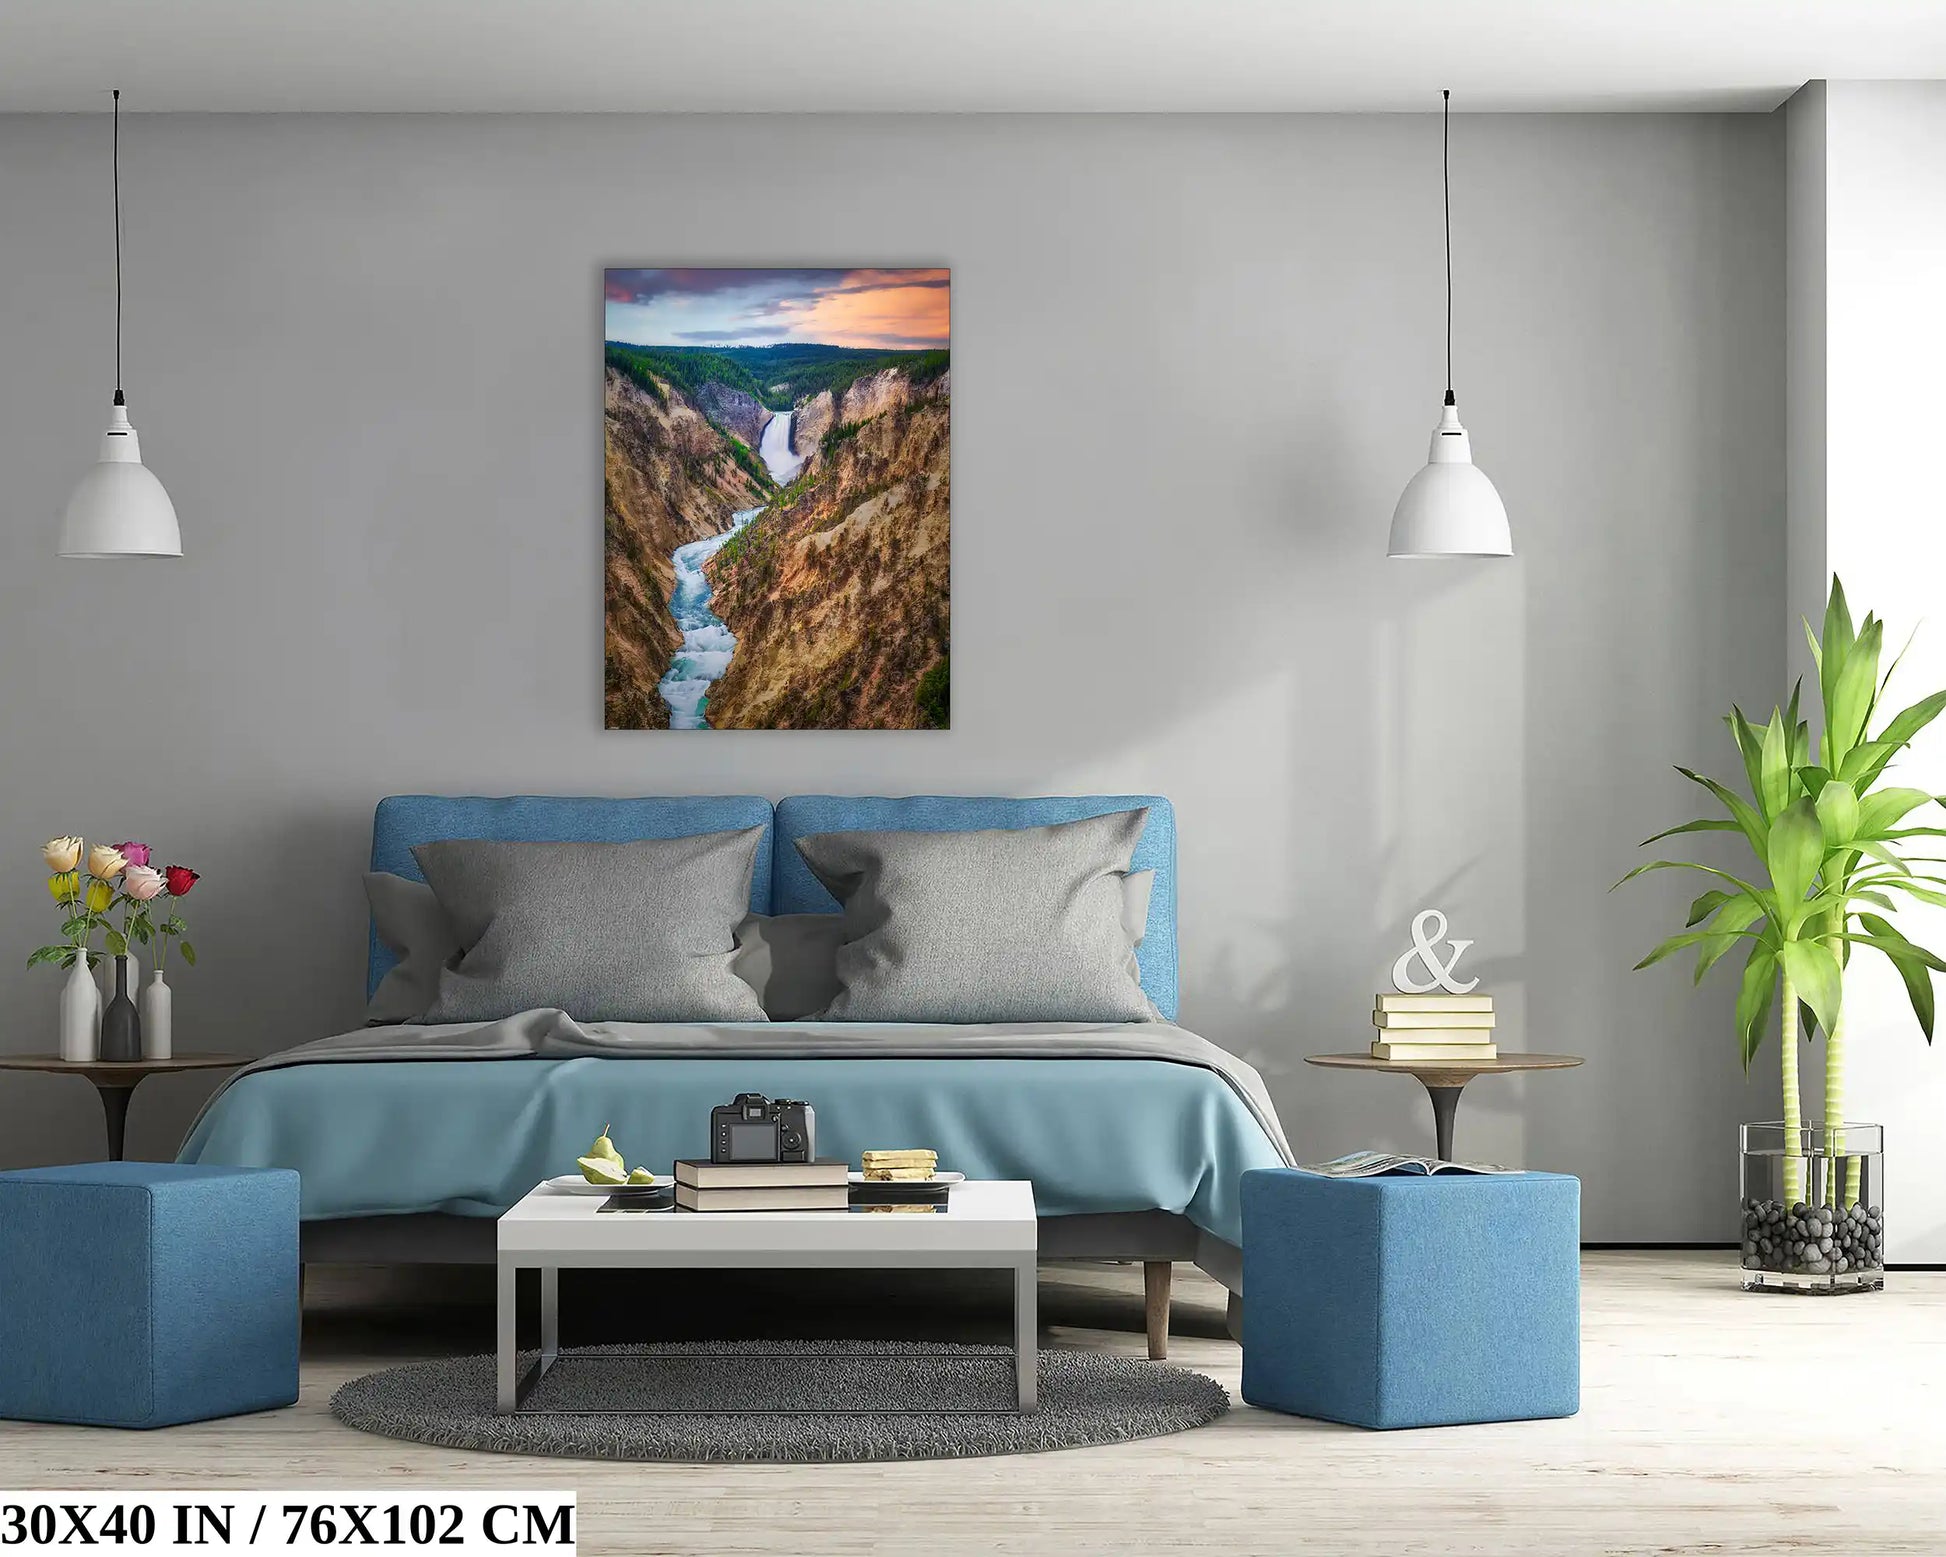 A bedroom adorned with a 30x40 inch canvas print of Lower Yellowstone Falls at sunset, offering a scenic focal point.